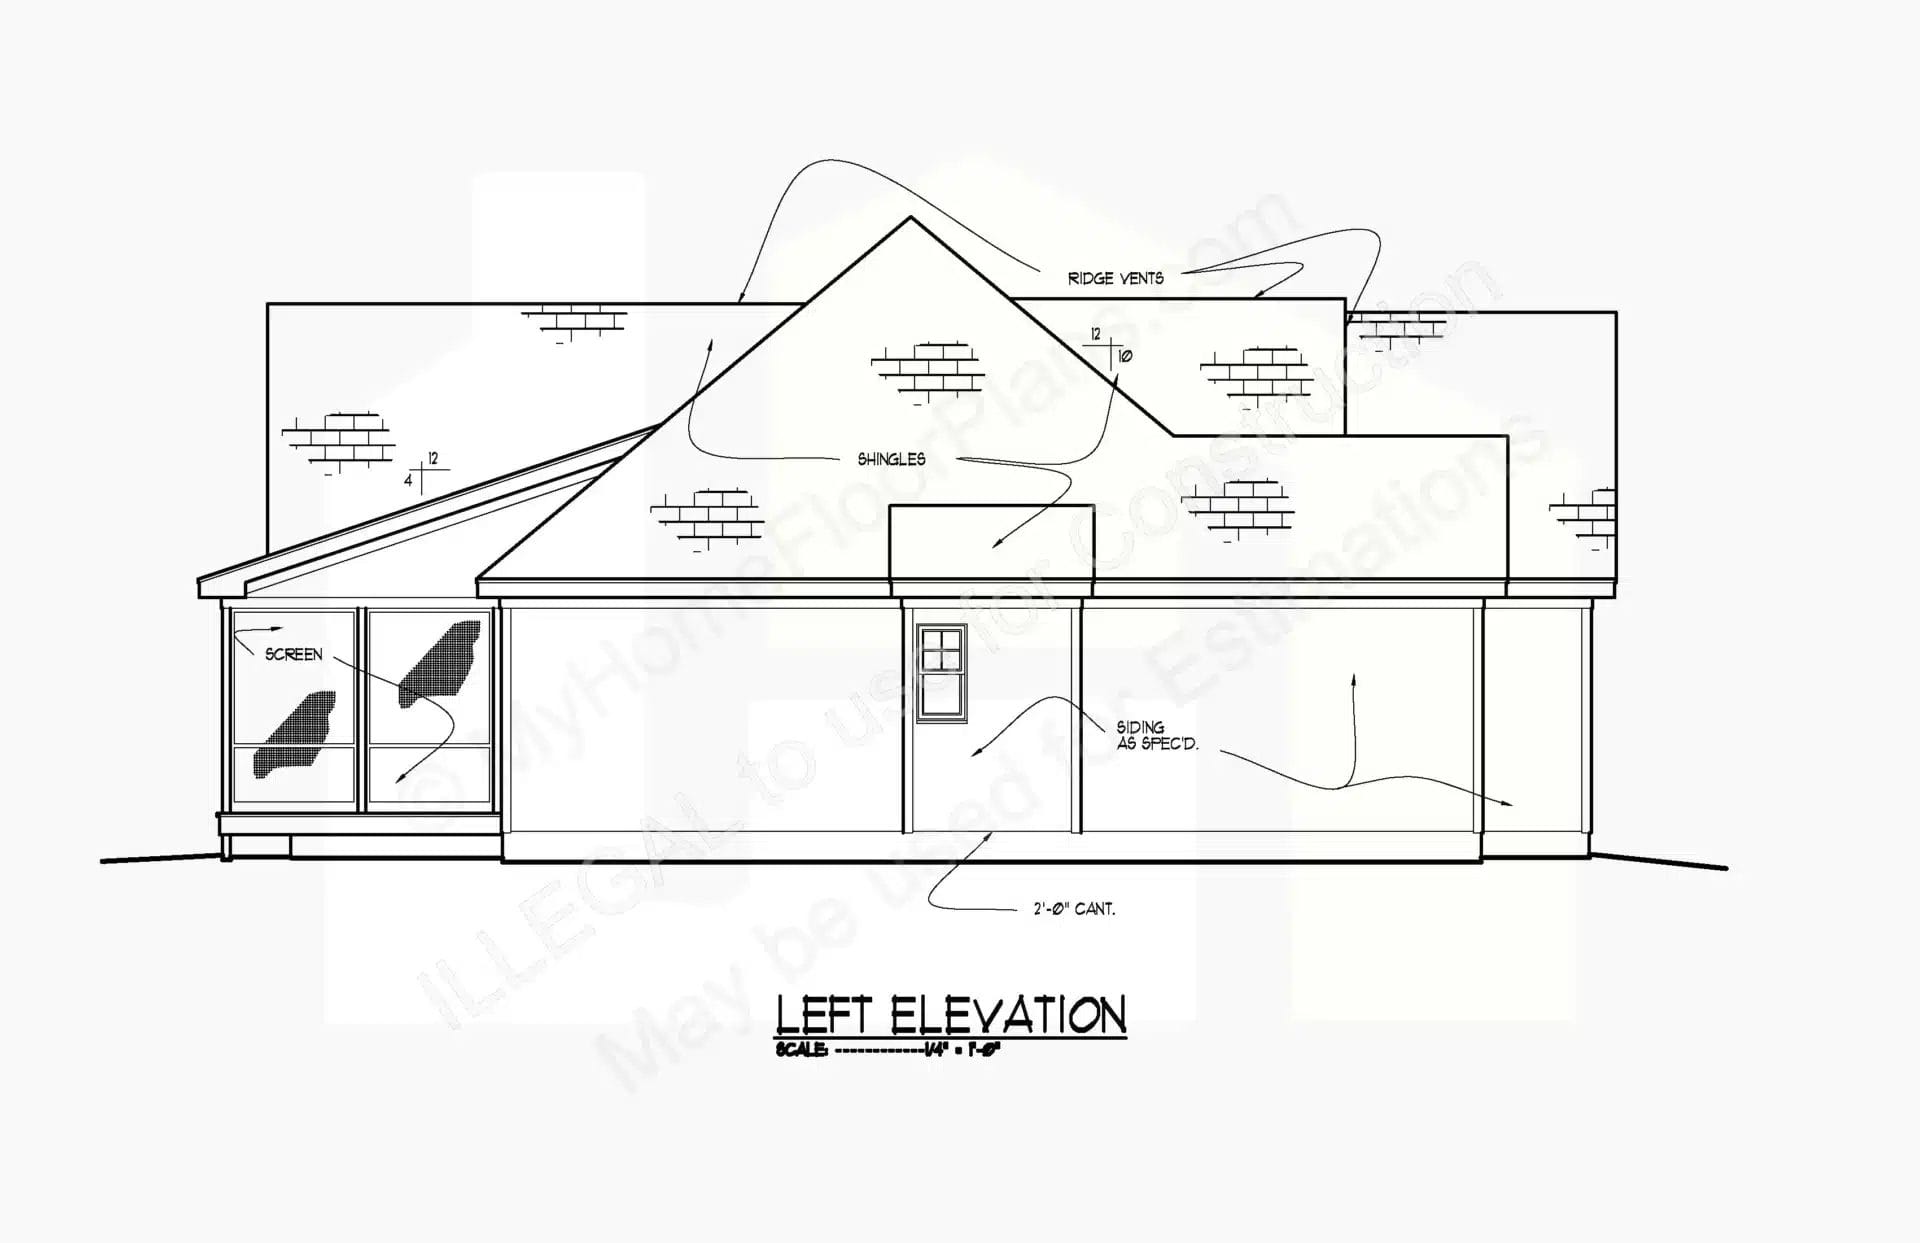 Architectural drawing of a 12-2289 home's left elevation featuring labeled parts such as ridge vents, shingles, and a screen. The structure shows multiple roof peaks and detailed scale measurements.